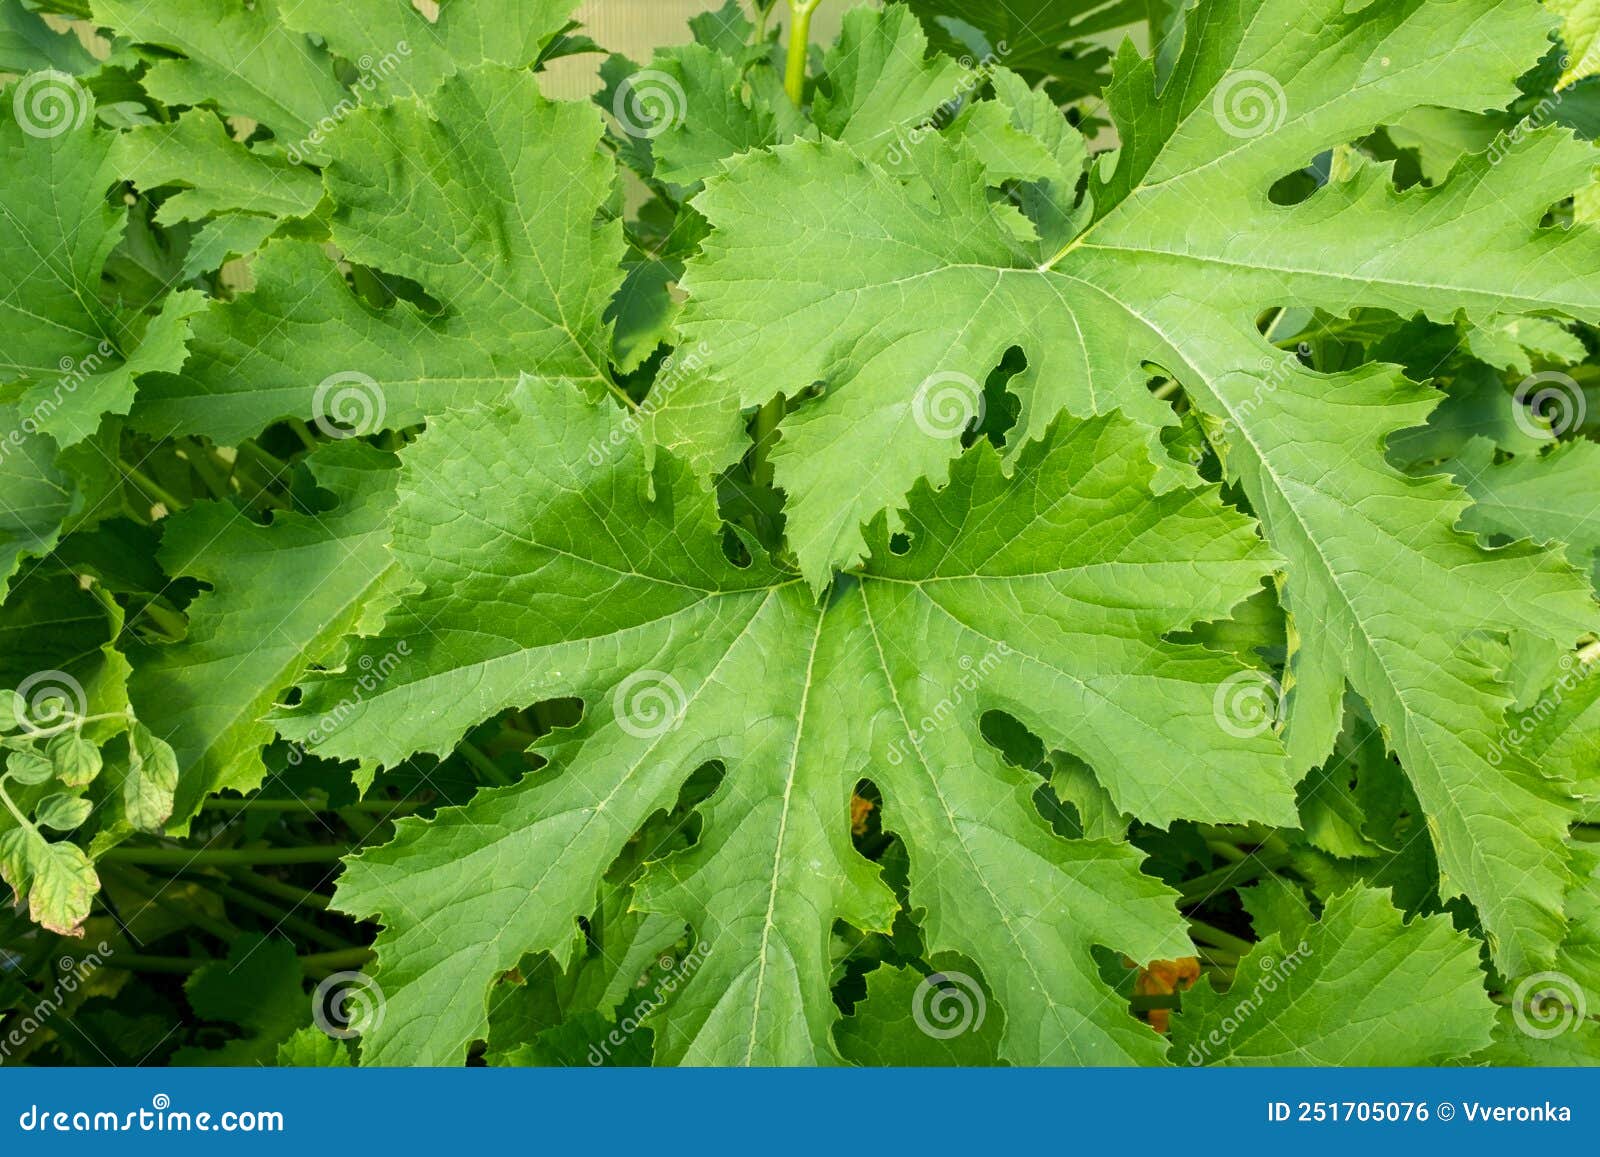 zuchini plant with green leaves, close-up. vegetable background from vegetable marrow bush for publication, poster